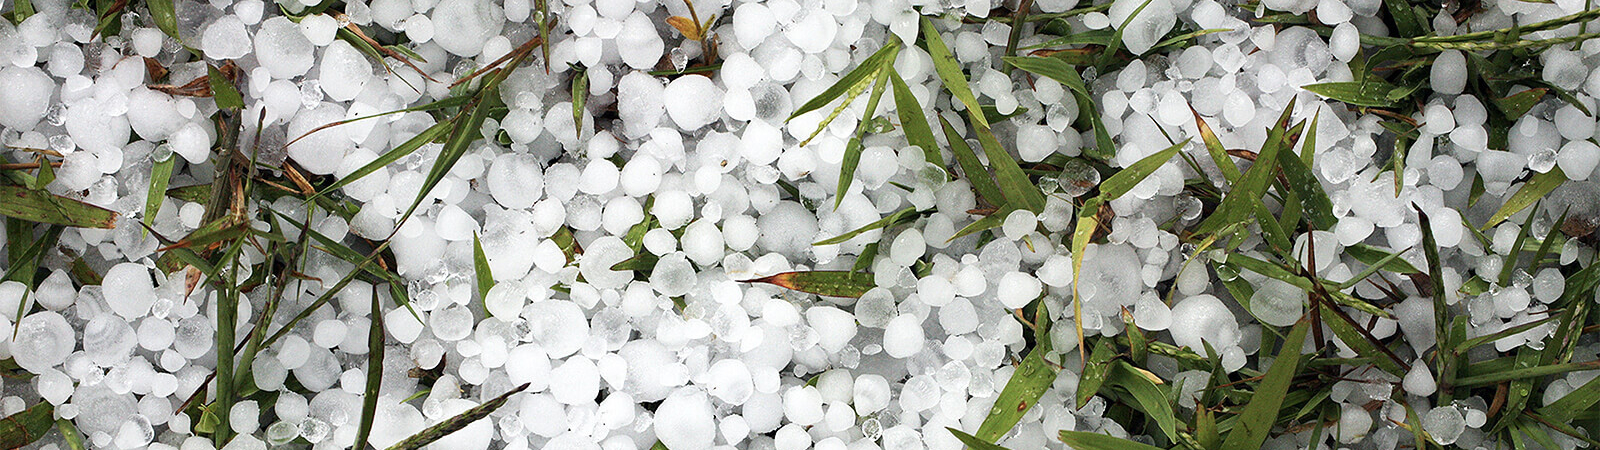 Large hailstones pilled on grass in backyard after storm